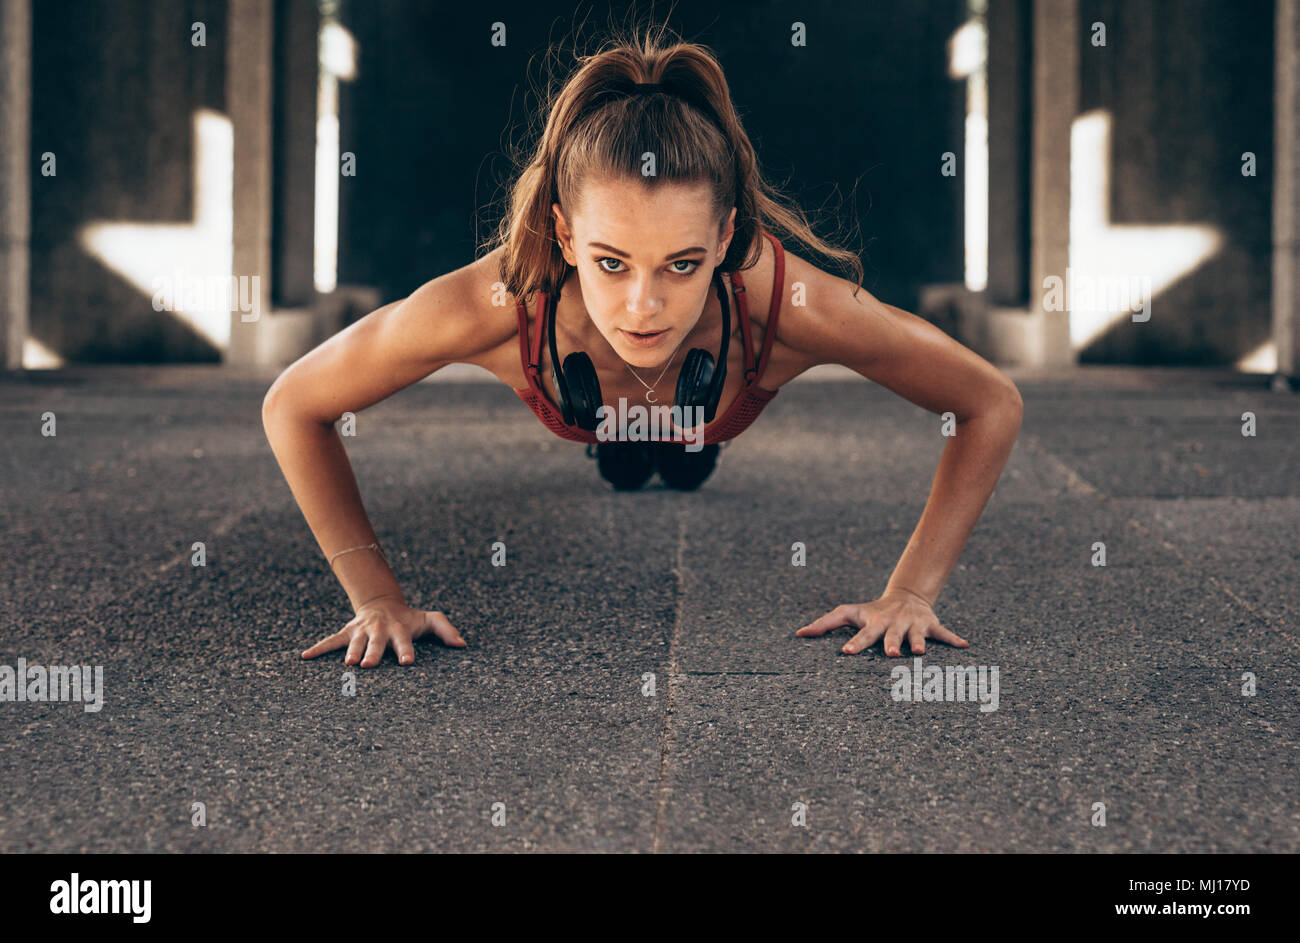 Fit young woman doing push ups exercises outdoors. Sportswoman doing core exercises. Stock Photo